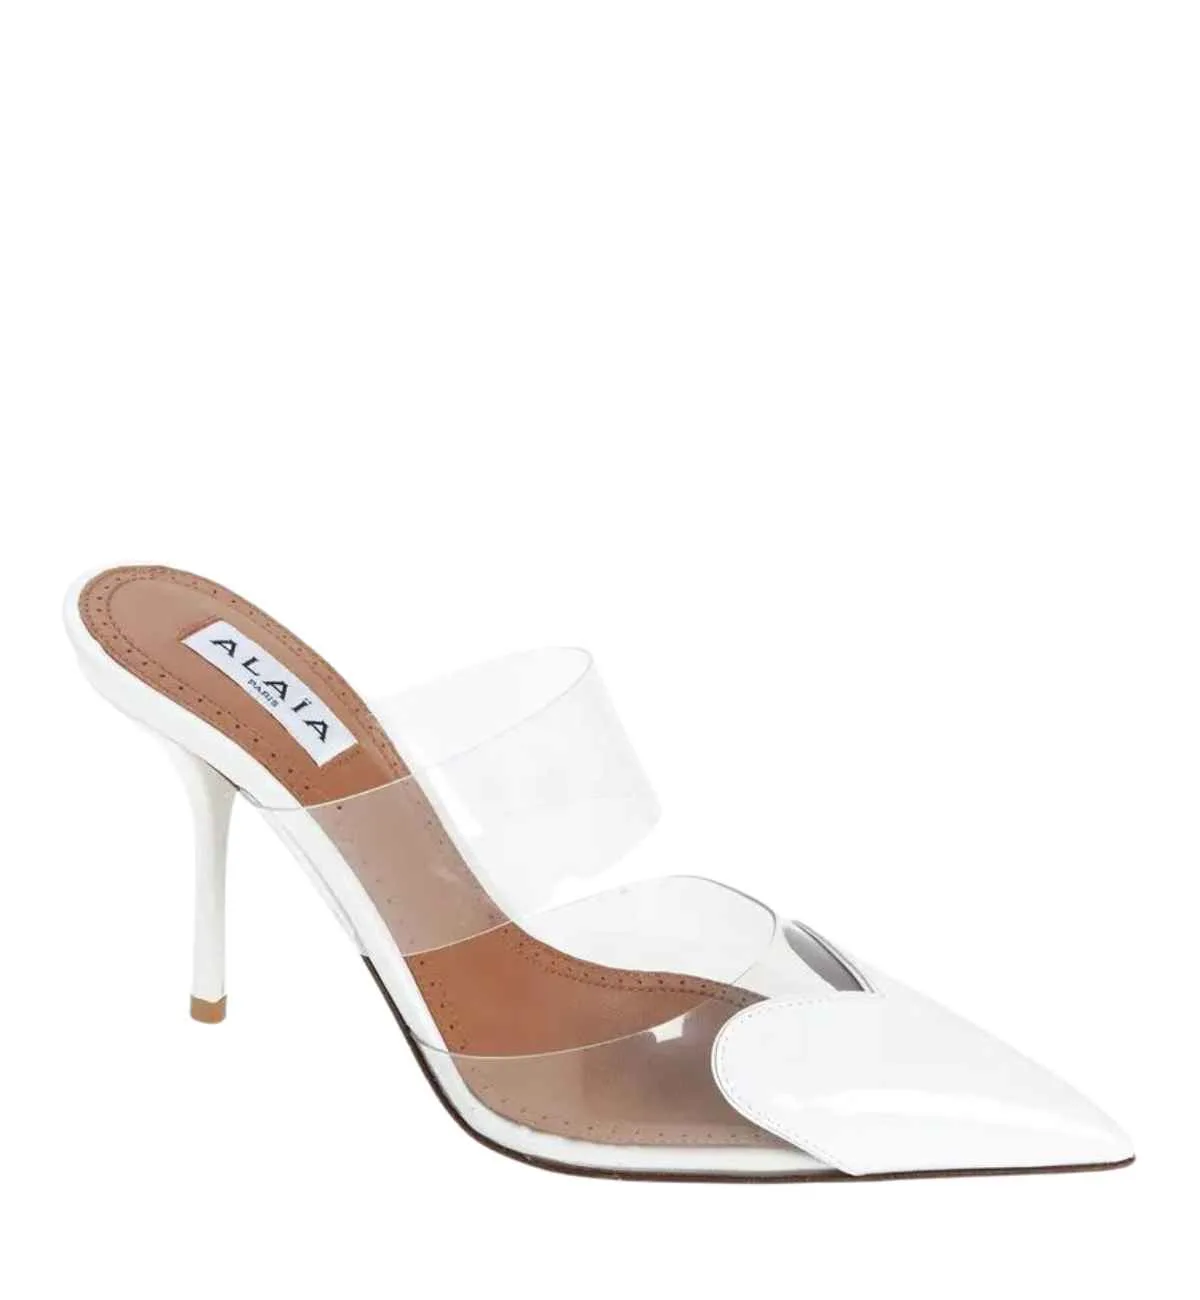 White pointed toe heart heel with clear band on white background.